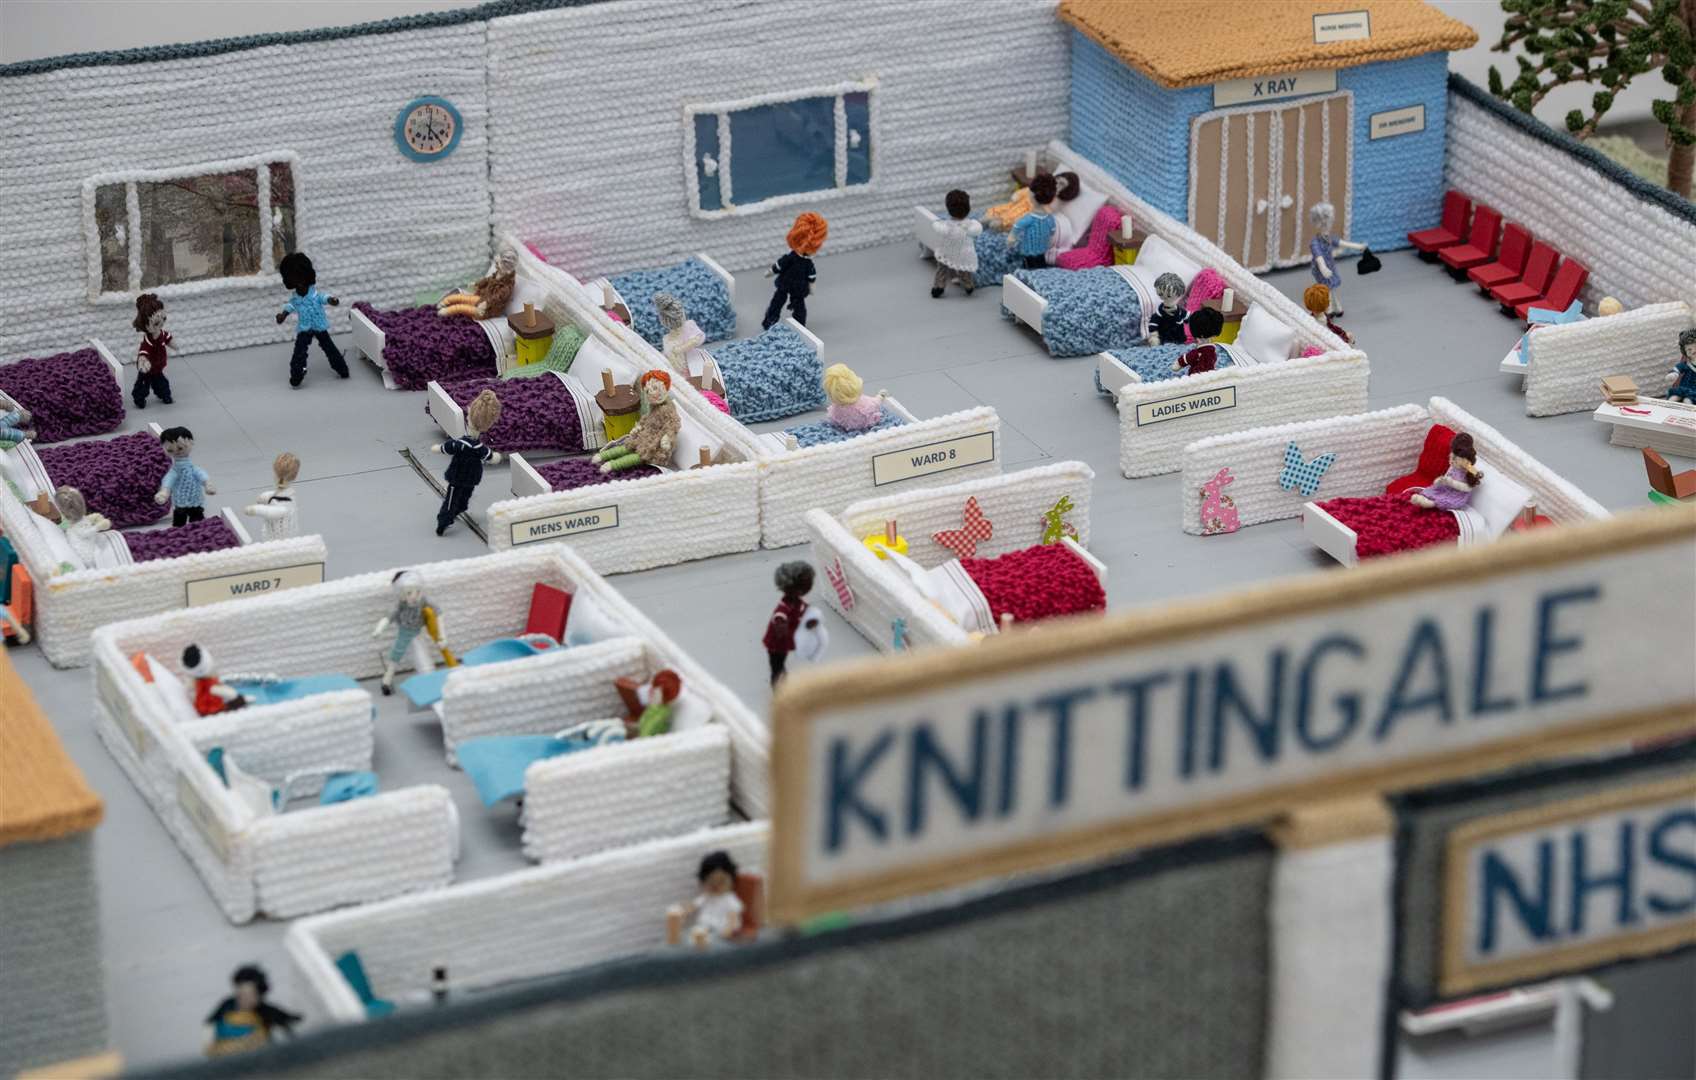 The ‘Knittingale’, created by great-great-grandmother Margaret Seaman (Joe Giddens/PA)